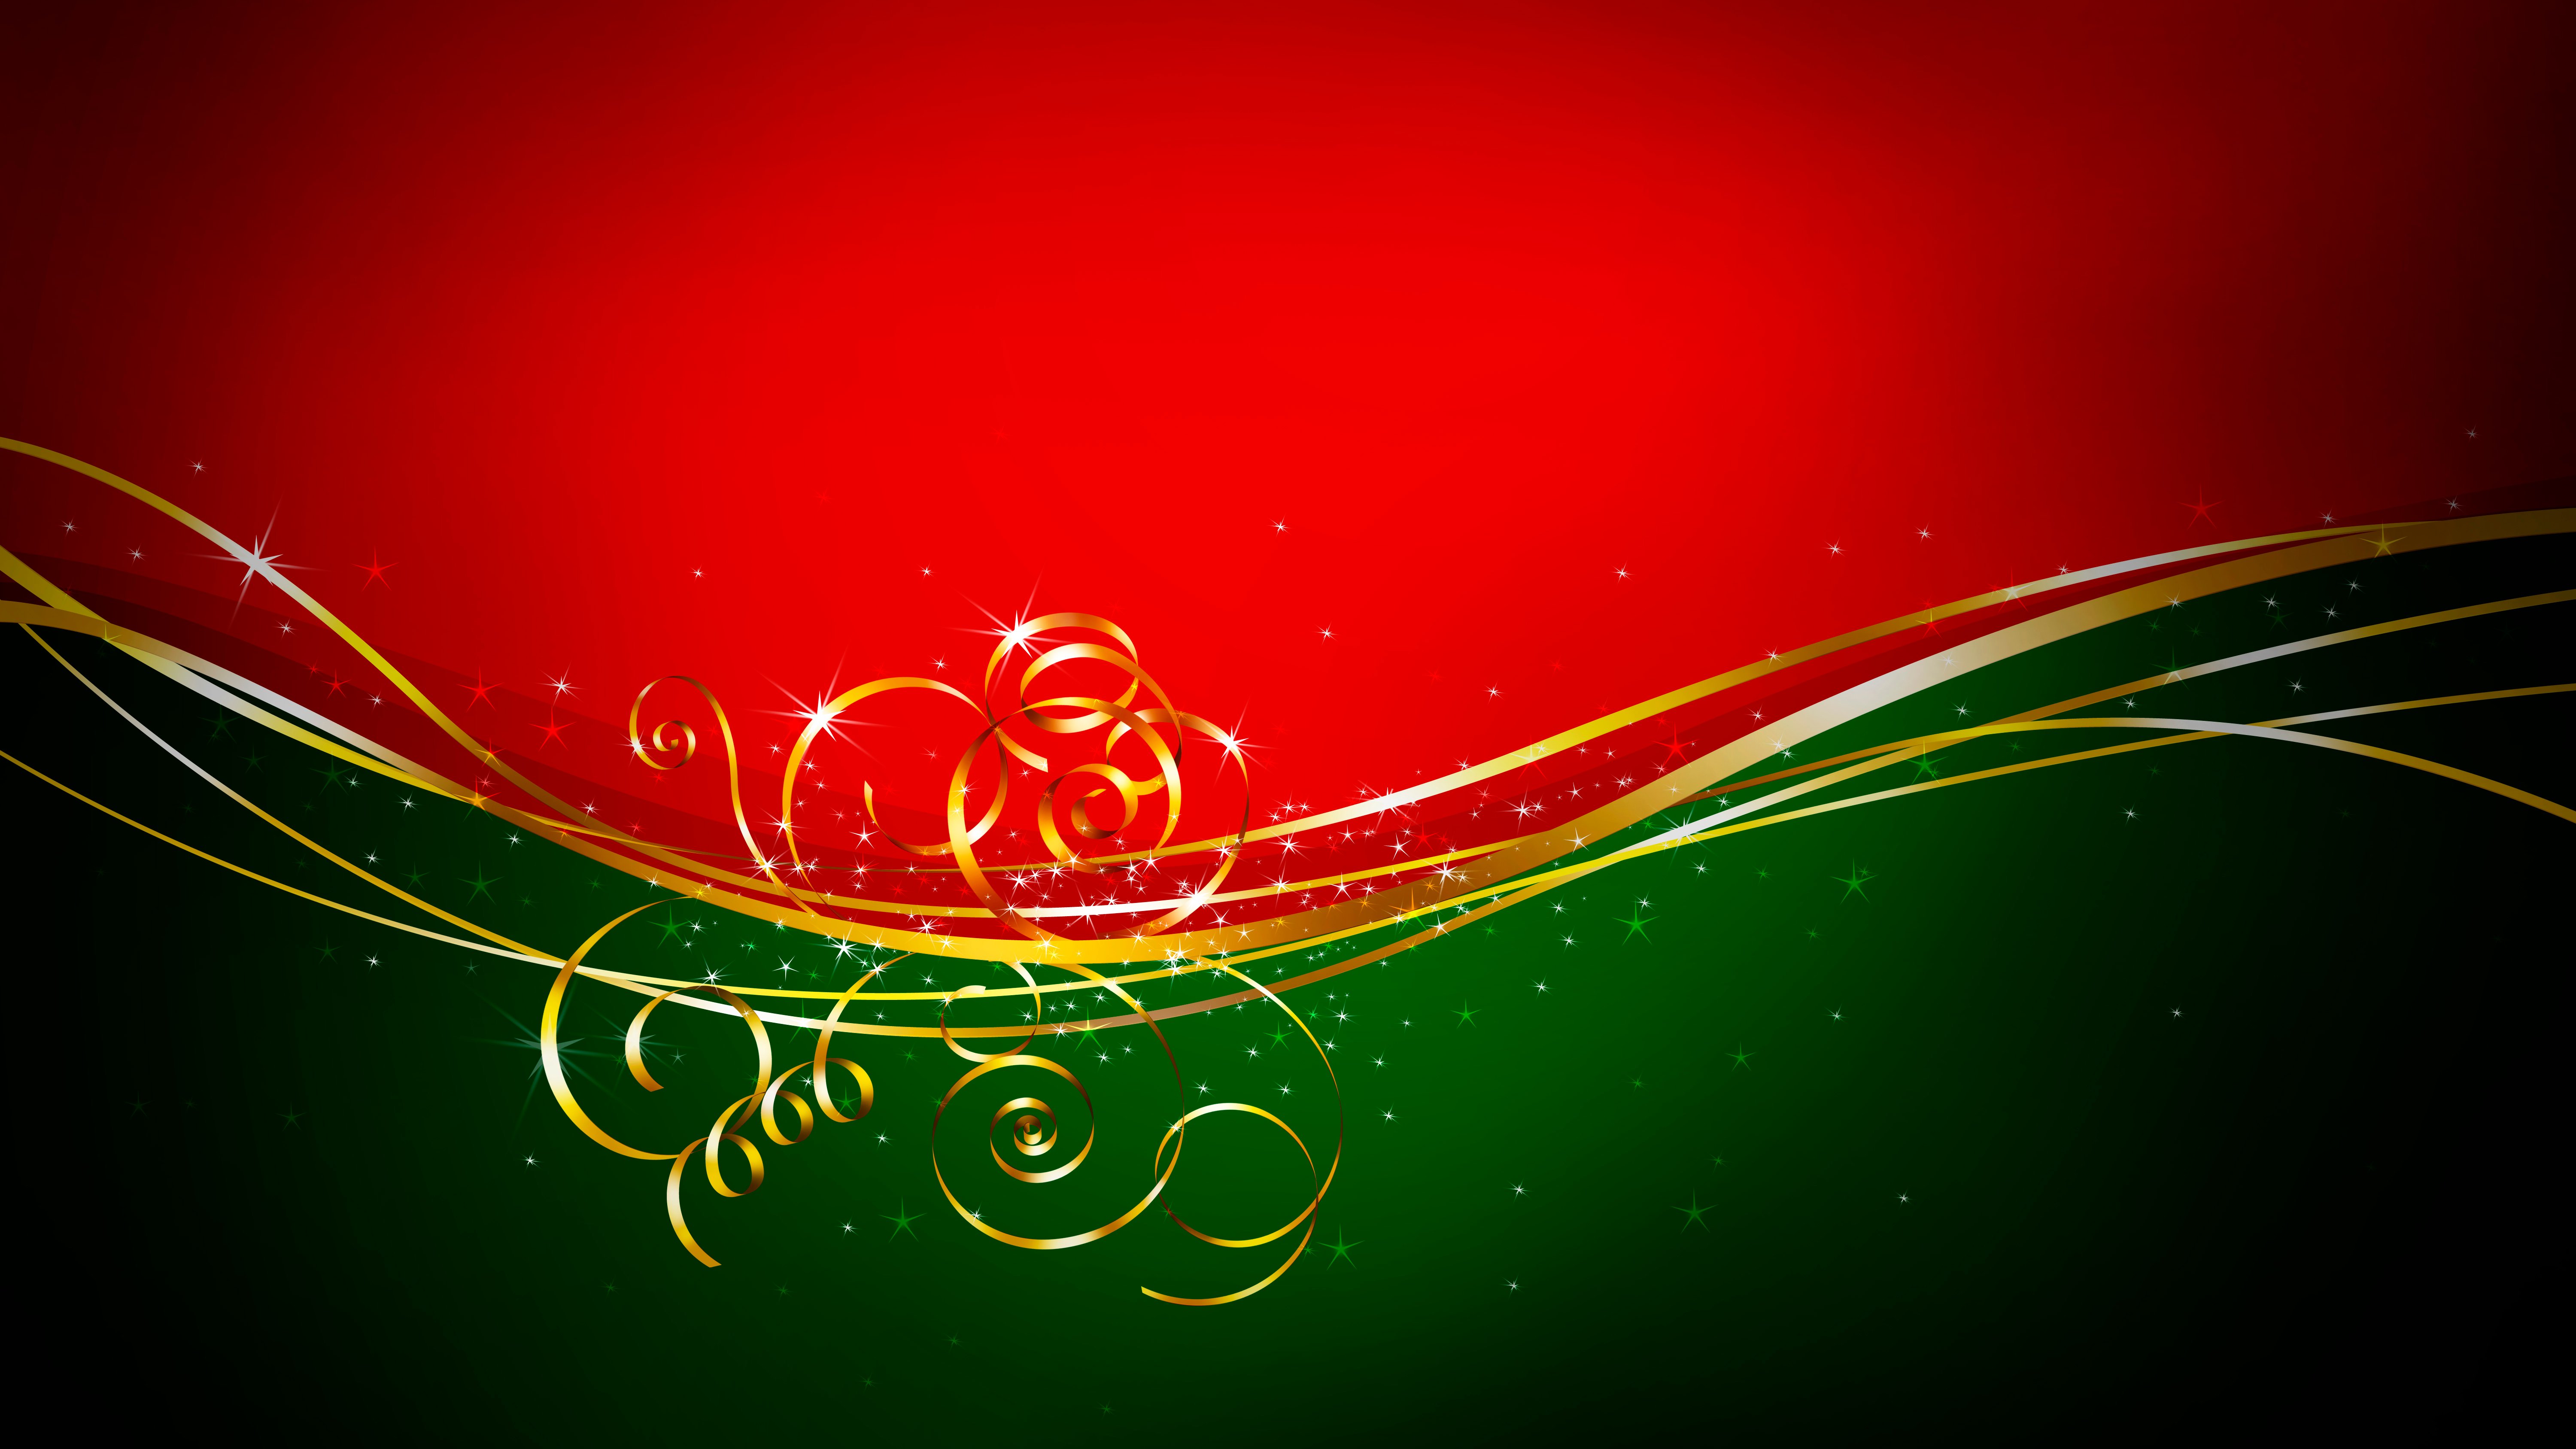 Red and Green Background Images 4236564 6000x3375 All For Desktop